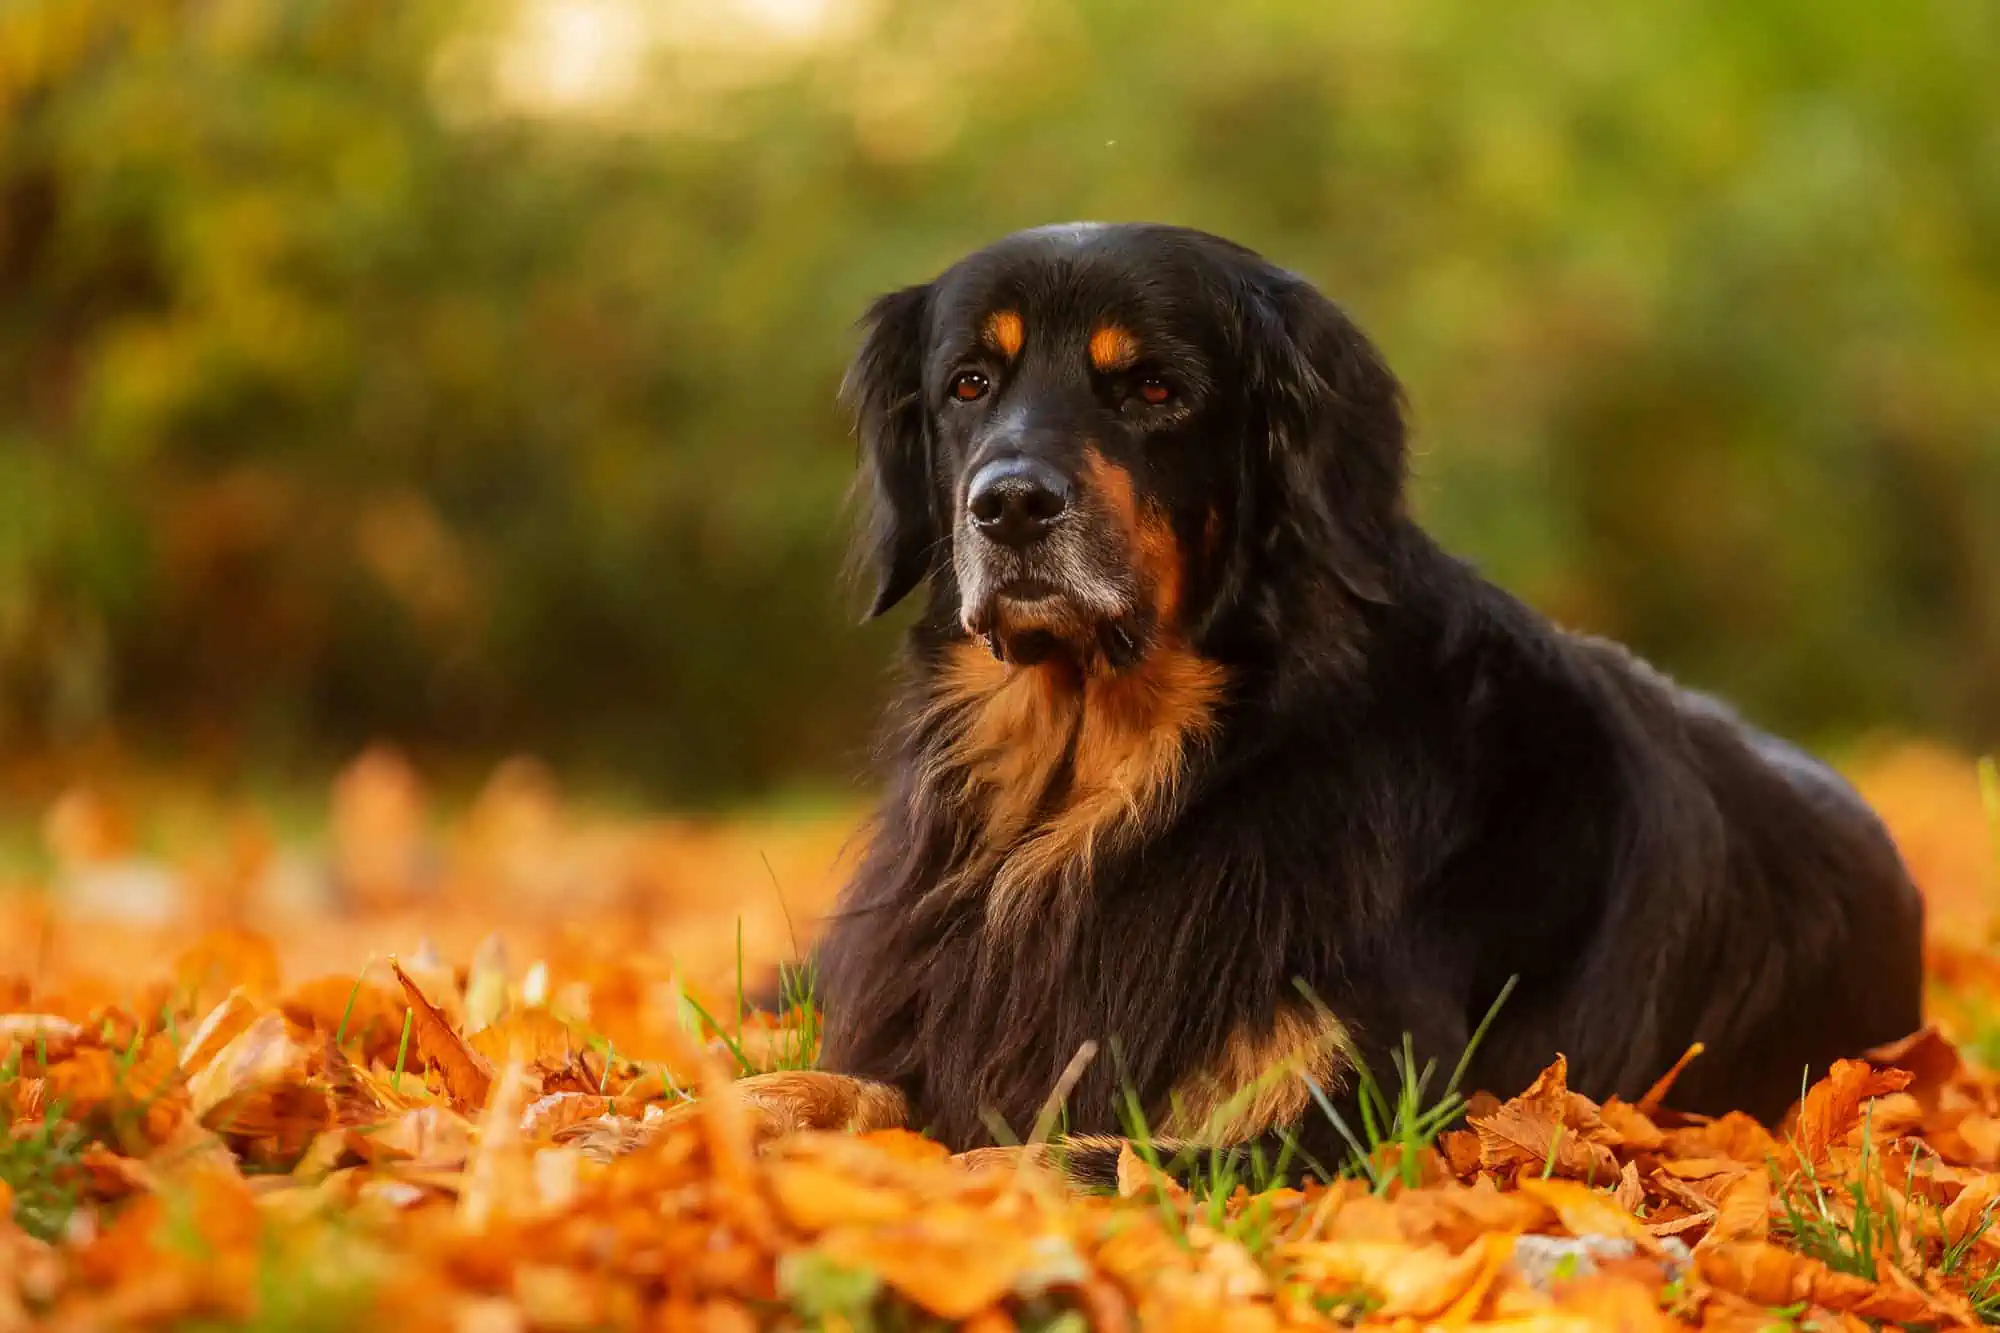 Dog in Leaves